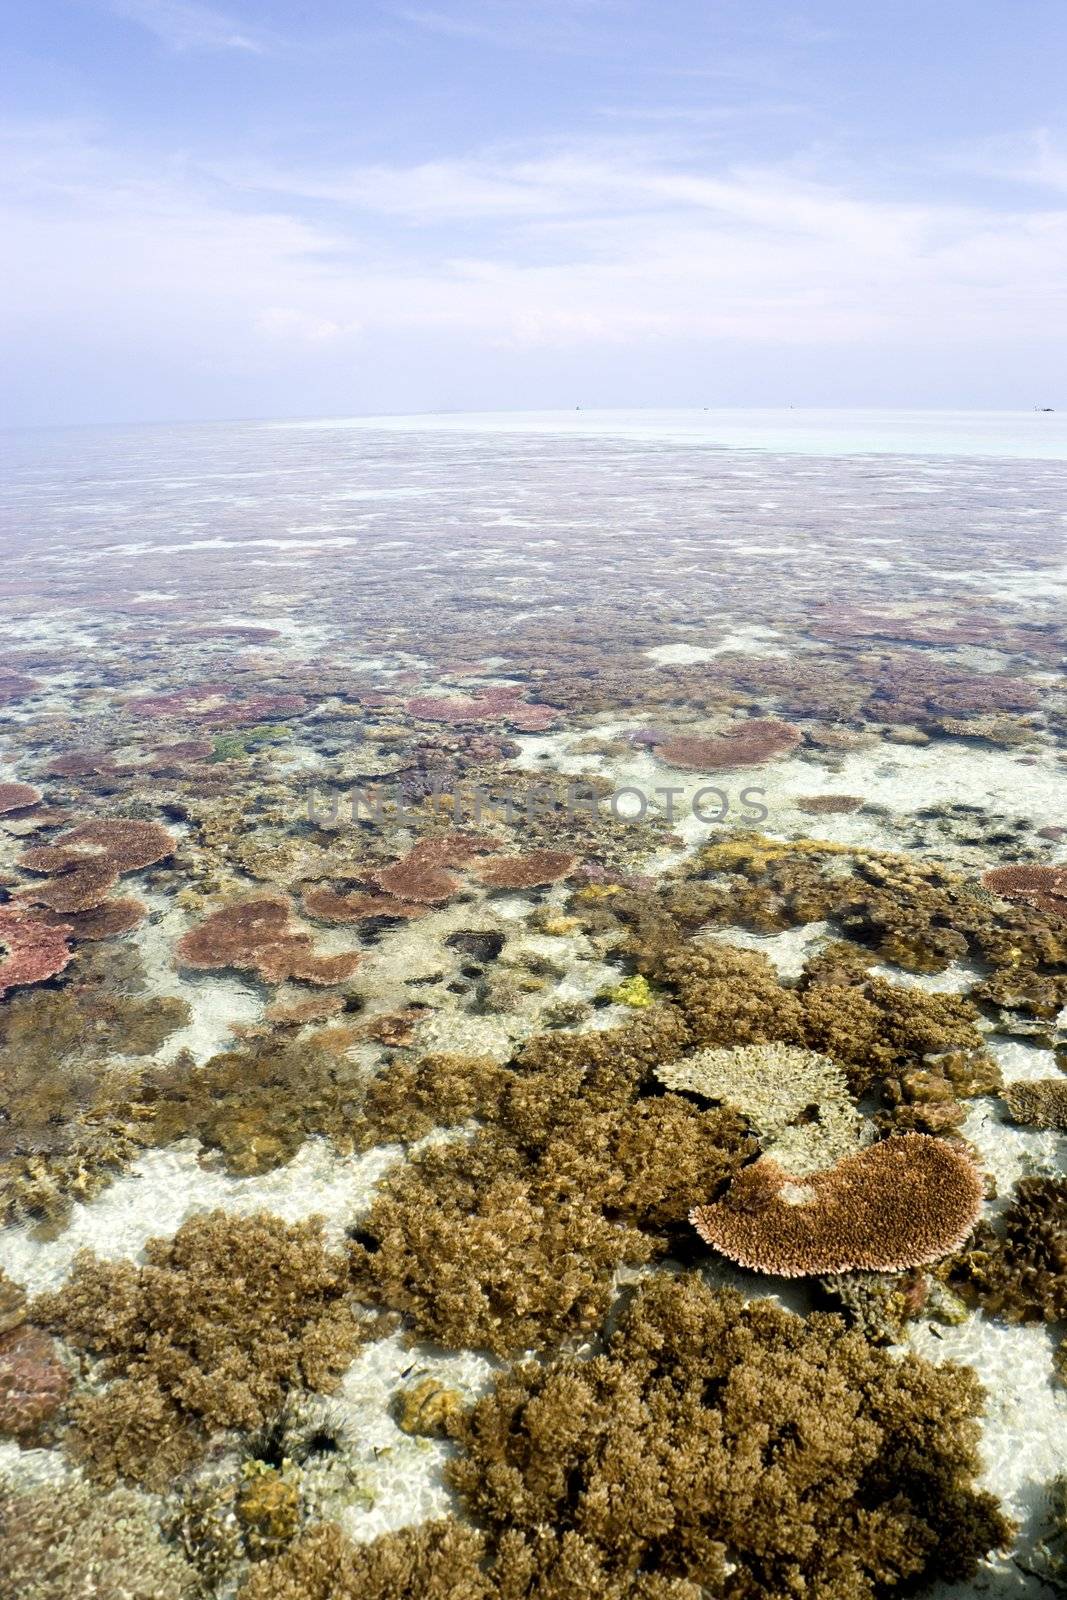 Image of a coral reef in Malaysian waters.